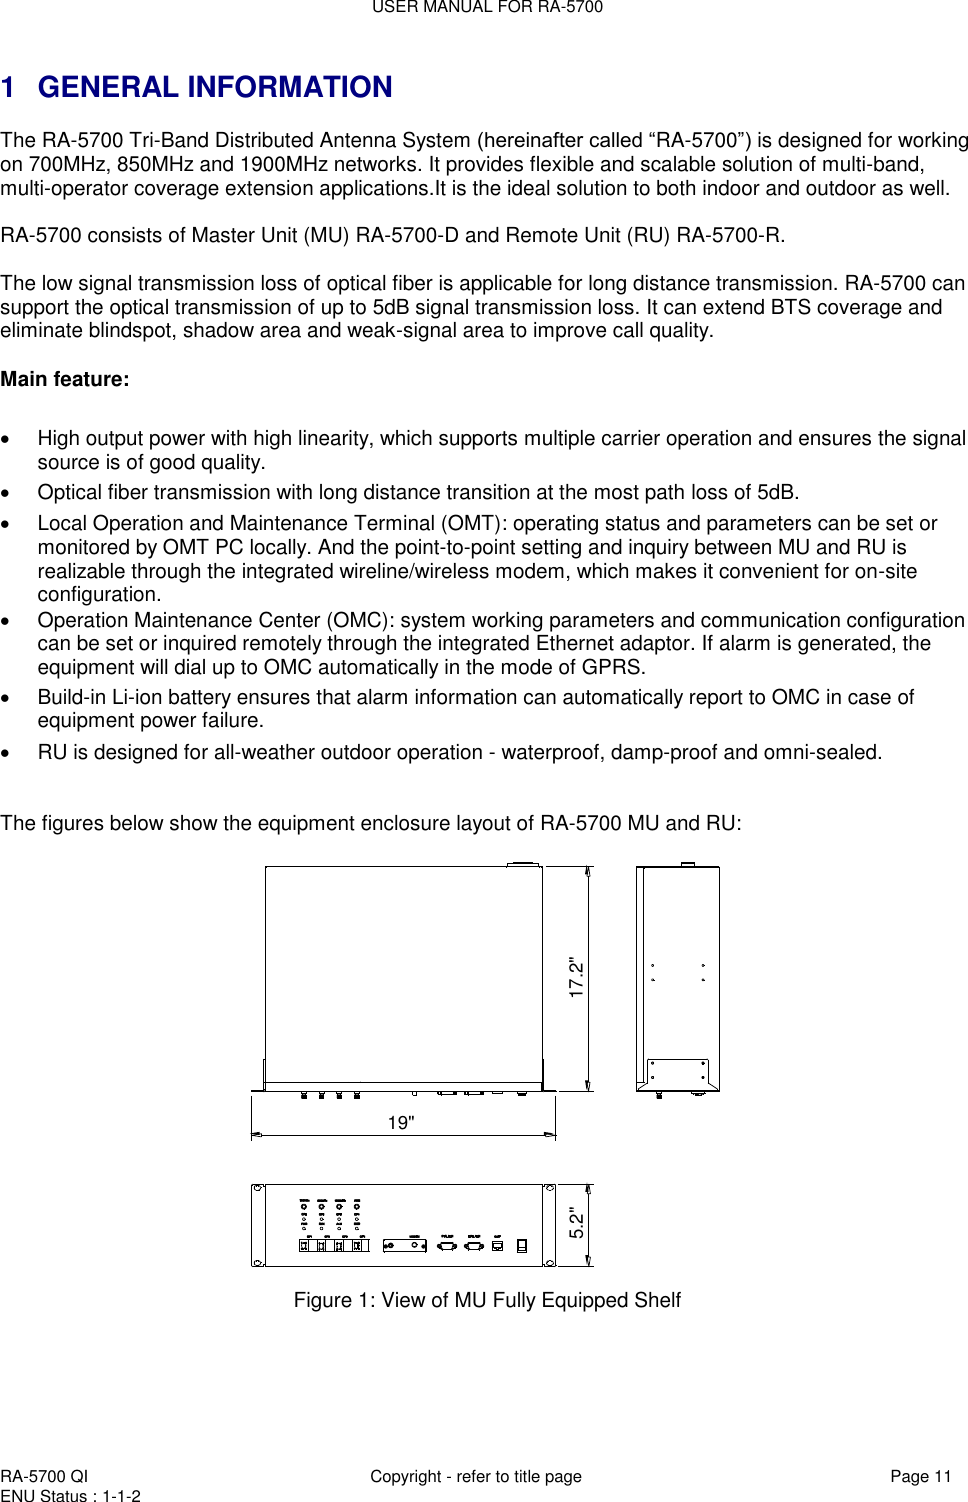 USER MANUAL FOR RA-5700  RA-5700 QI  Copyright - refer to title page Page 11 ENU Status : 1-1-2    1  GENERAL INFORMATION The RA-5700 Tri-Band Distributed Antenna System (hereinafter called “RA-5700”) is designed for working on 700MHz, 850MHz and 1900MHz networks. It provides flexible and scalable solution of multi-band, multi-operator coverage extension applications.It is the ideal solution to both indoor and outdoor as well.   RA-5700 consists of Master Unit (MU) RA-5700-D and Remote Unit (RU) RA-5700-R.   The low signal transmission loss of optical fiber is applicable for long distance transmission. RA-5700 can support the optical transmission of up to 5dB signal transmission loss. It can extend BTS coverage and eliminate blindspot, shadow area and weak-signal area to improve call quality.   Main feature:     High output power with high linearity, which supports multiple carrier operation and ensures the signal source is of good quality.   Optical fiber transmission with long distance transition at the most path loss of 5dB.   Local Operation and Maintenance Terminal (OMT): operating status and parameters can be set or monitored by OMT PC locally. And the point-to-point setting and inquiry between MU and RU is realizable through the integrated wireline/wireless modem, which makes it convenient for on-site configuration.    Operation Maintenance Center (OMC): system working parameters and communication configuration can be set or inquired remotely through the integrated Ethernet adaptor. If alarm is generated, the equipment will dial up to OMC automatically in the mode of GPRS.   Build-in Li-ion battery ensures that alarm information can automatically report to OMC in case of equipment power failure.  RU is designed for all-weather outdoor operation - waterproof, damp-proof and omni-sealed.    The figures below show the equipment enclosure layout of RA-5700 MU and RU: 5.2&quot; 17.2&quot;19&quot; Figure 1: View of MU Fully Equipped Shelf   